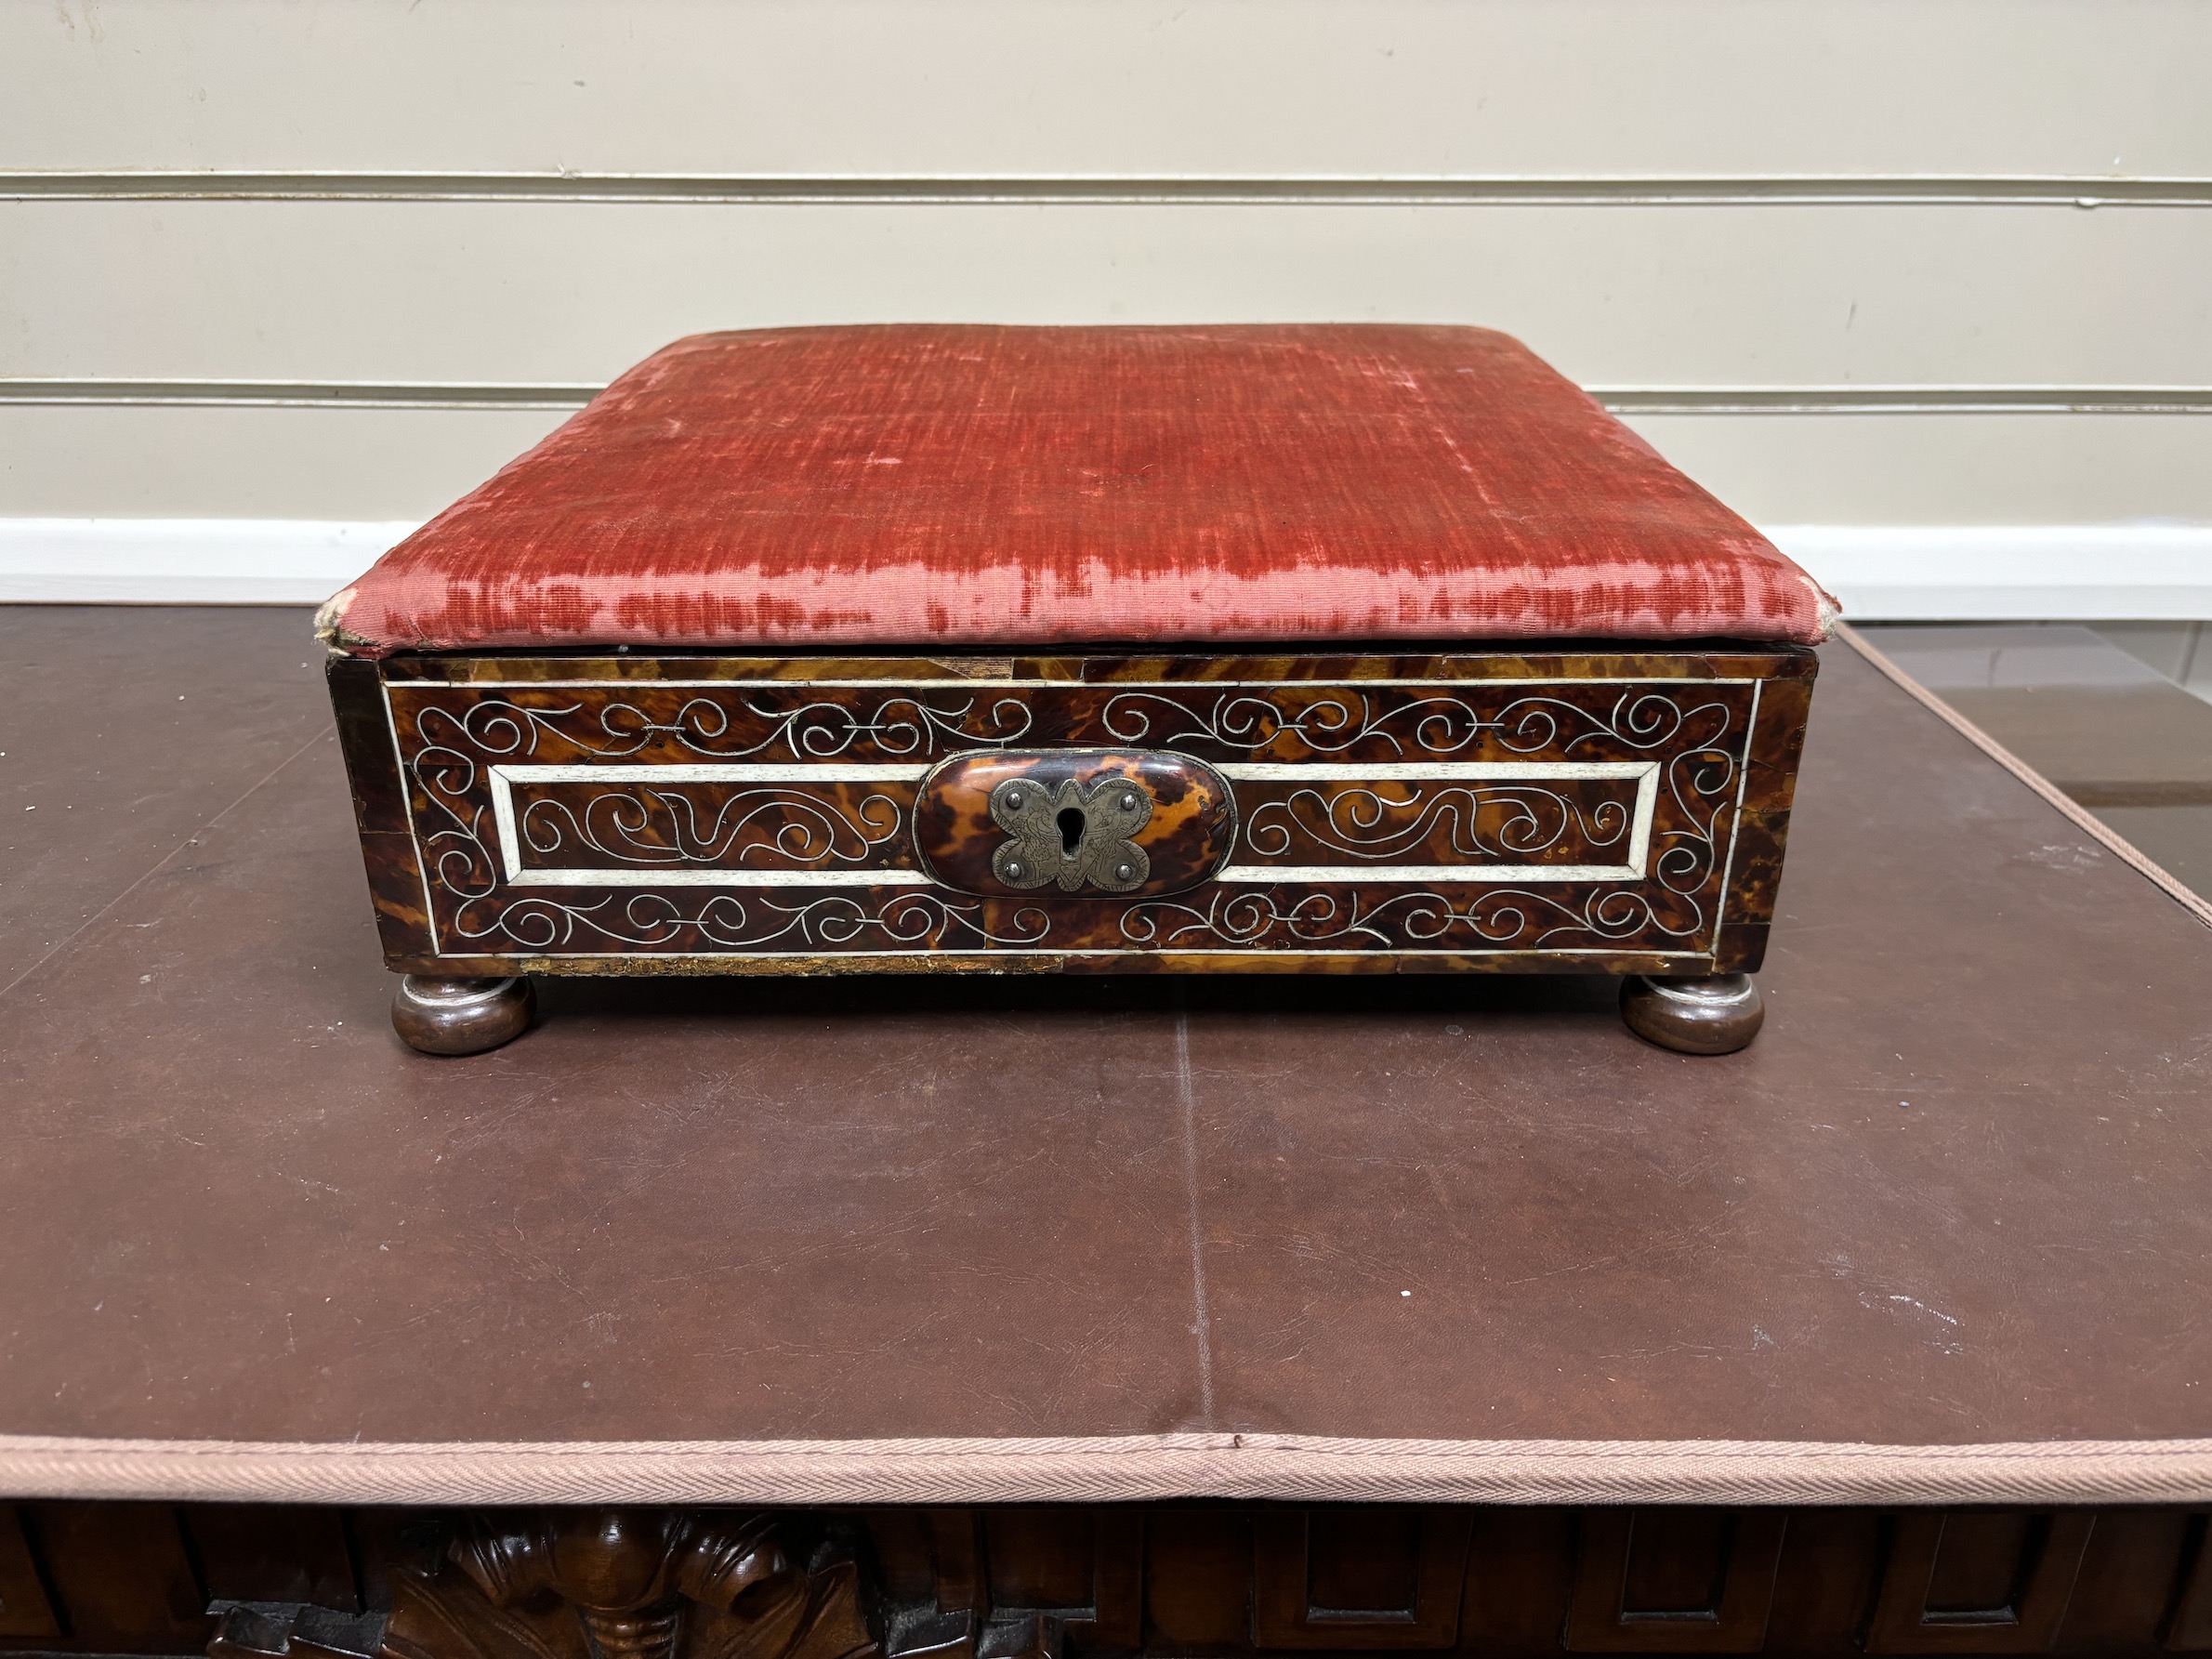 An 18th / early 19th century Portuguese tortoiseshell box with bone inlay and silk velvet lining with matching padded top, on bun feet, width 39cm, depth 38cm, height 16cm